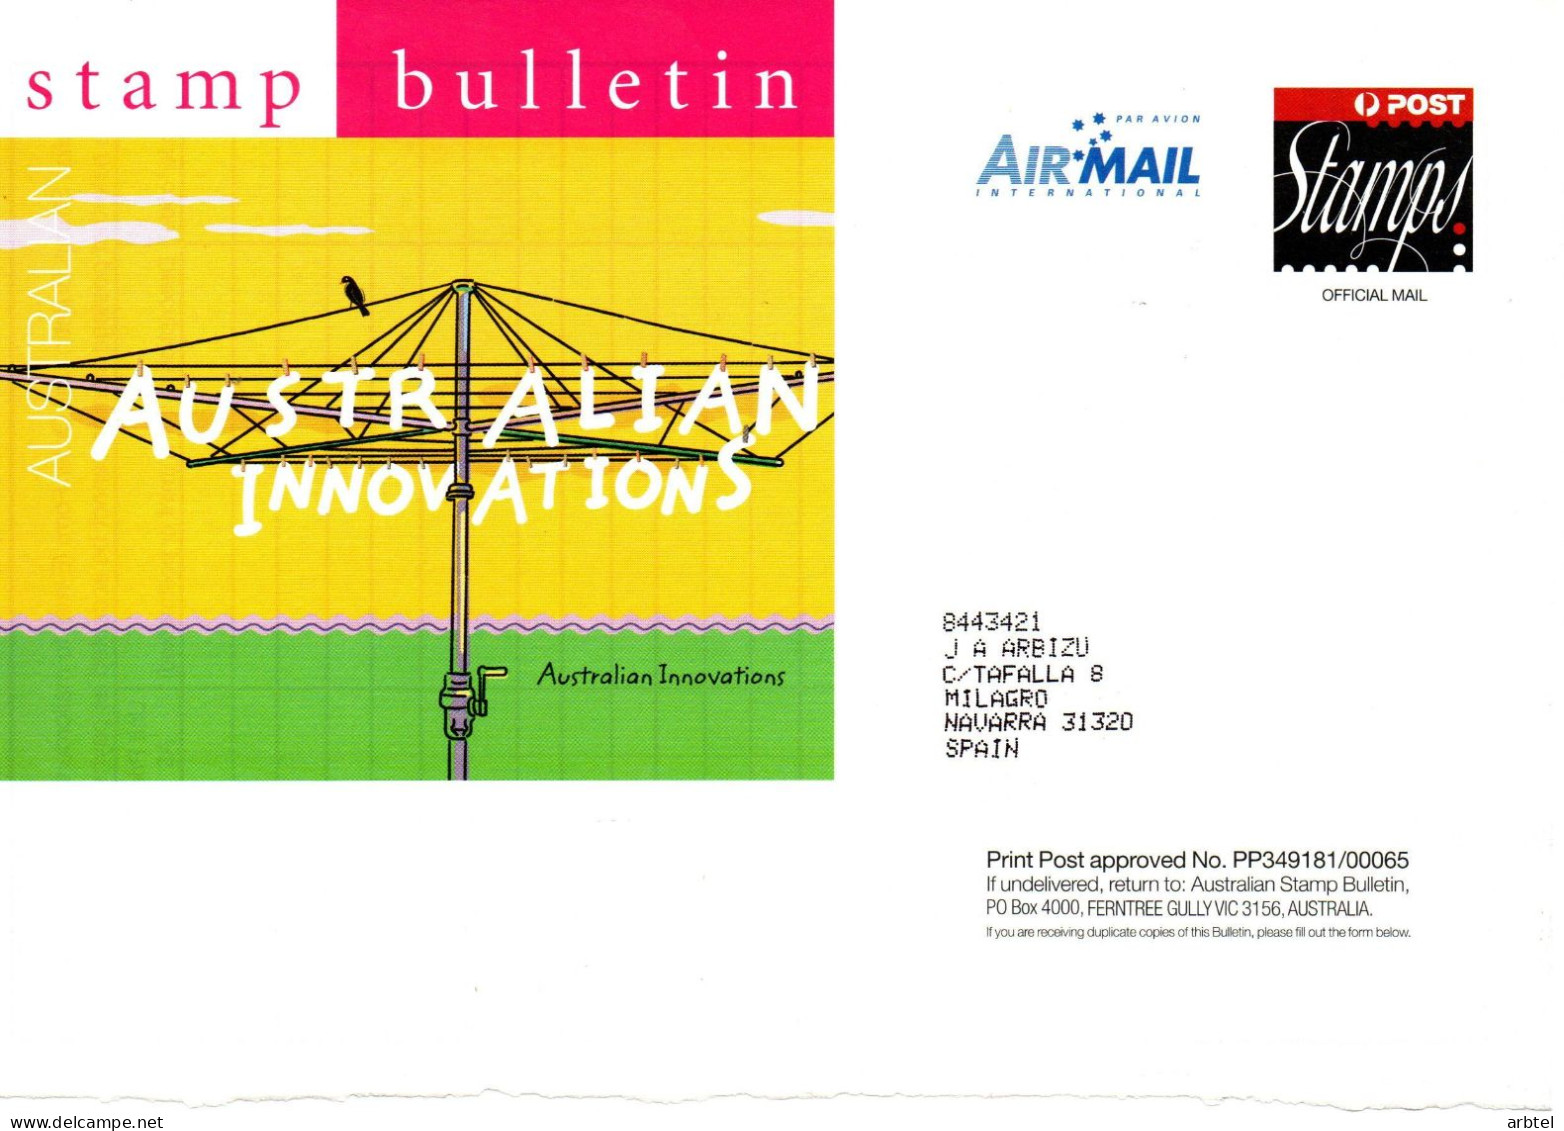 AUSTRALIA STAMP BULLETIN FRONTAL FRONT OFFICIAL MAIL 2005 AUSTRALIAN INNOVATIONS - Storia Postale